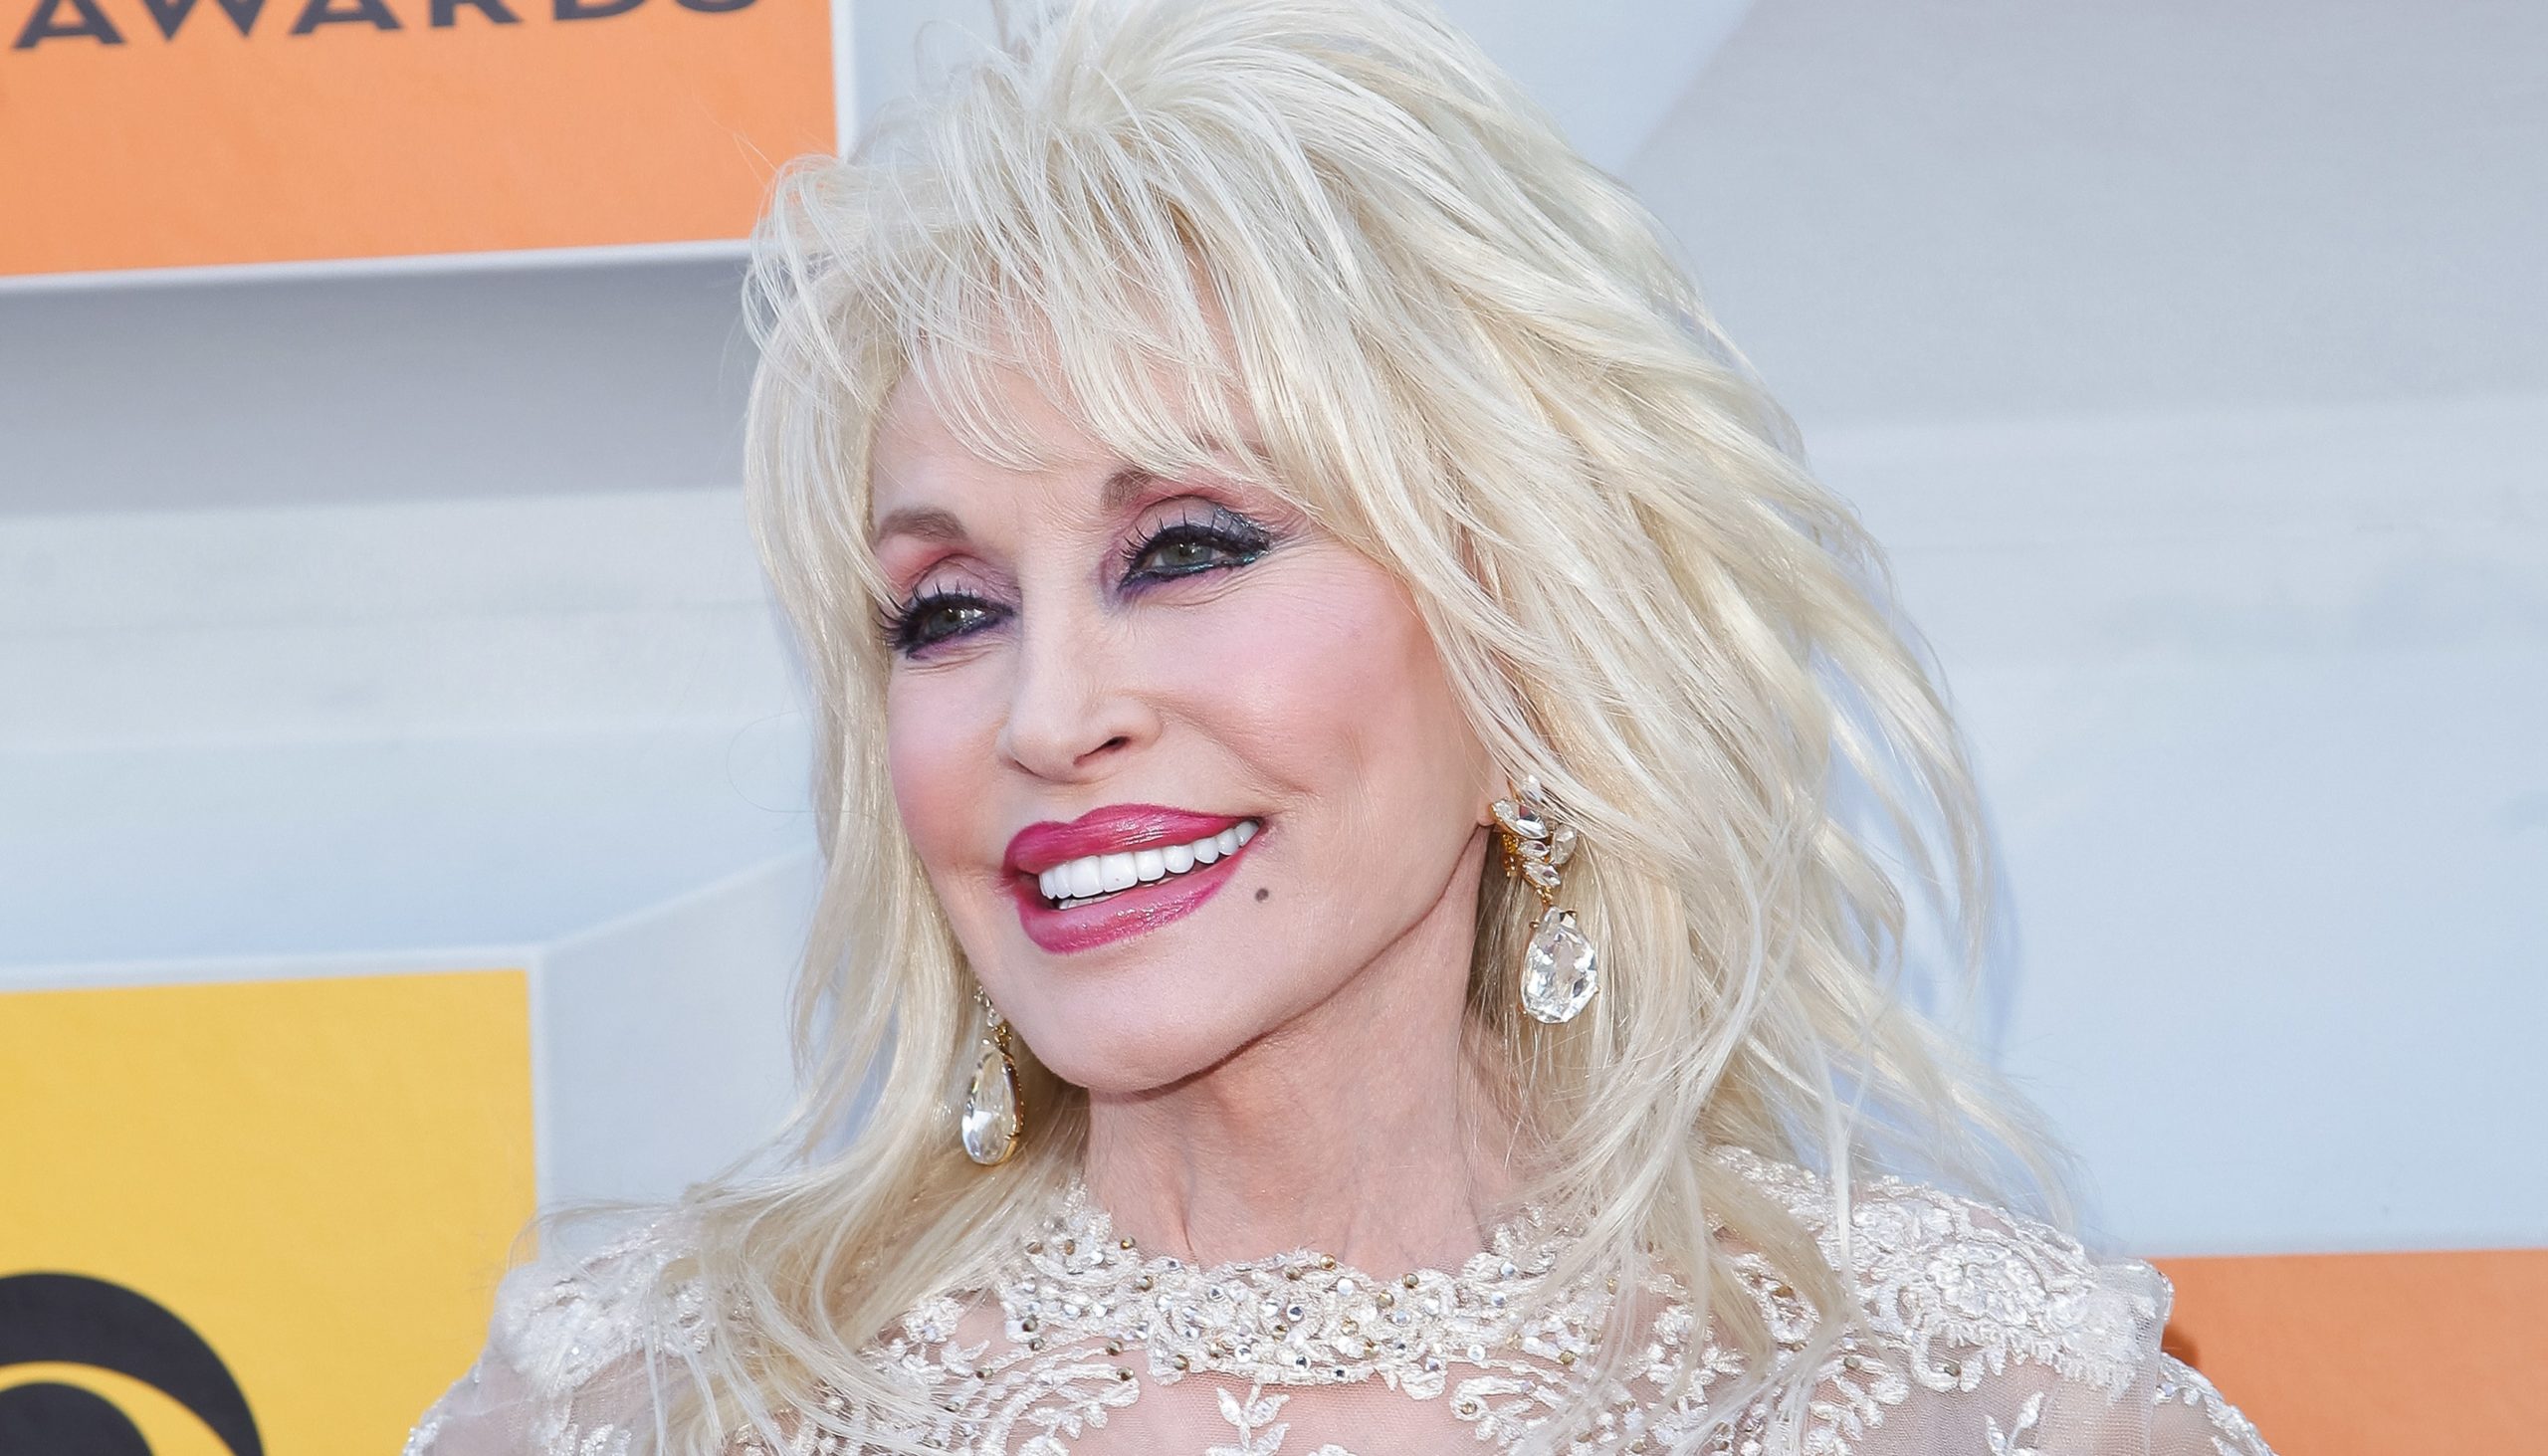 Dolly Parton Explains How She Uses Her Acrylic Nails to Make Music